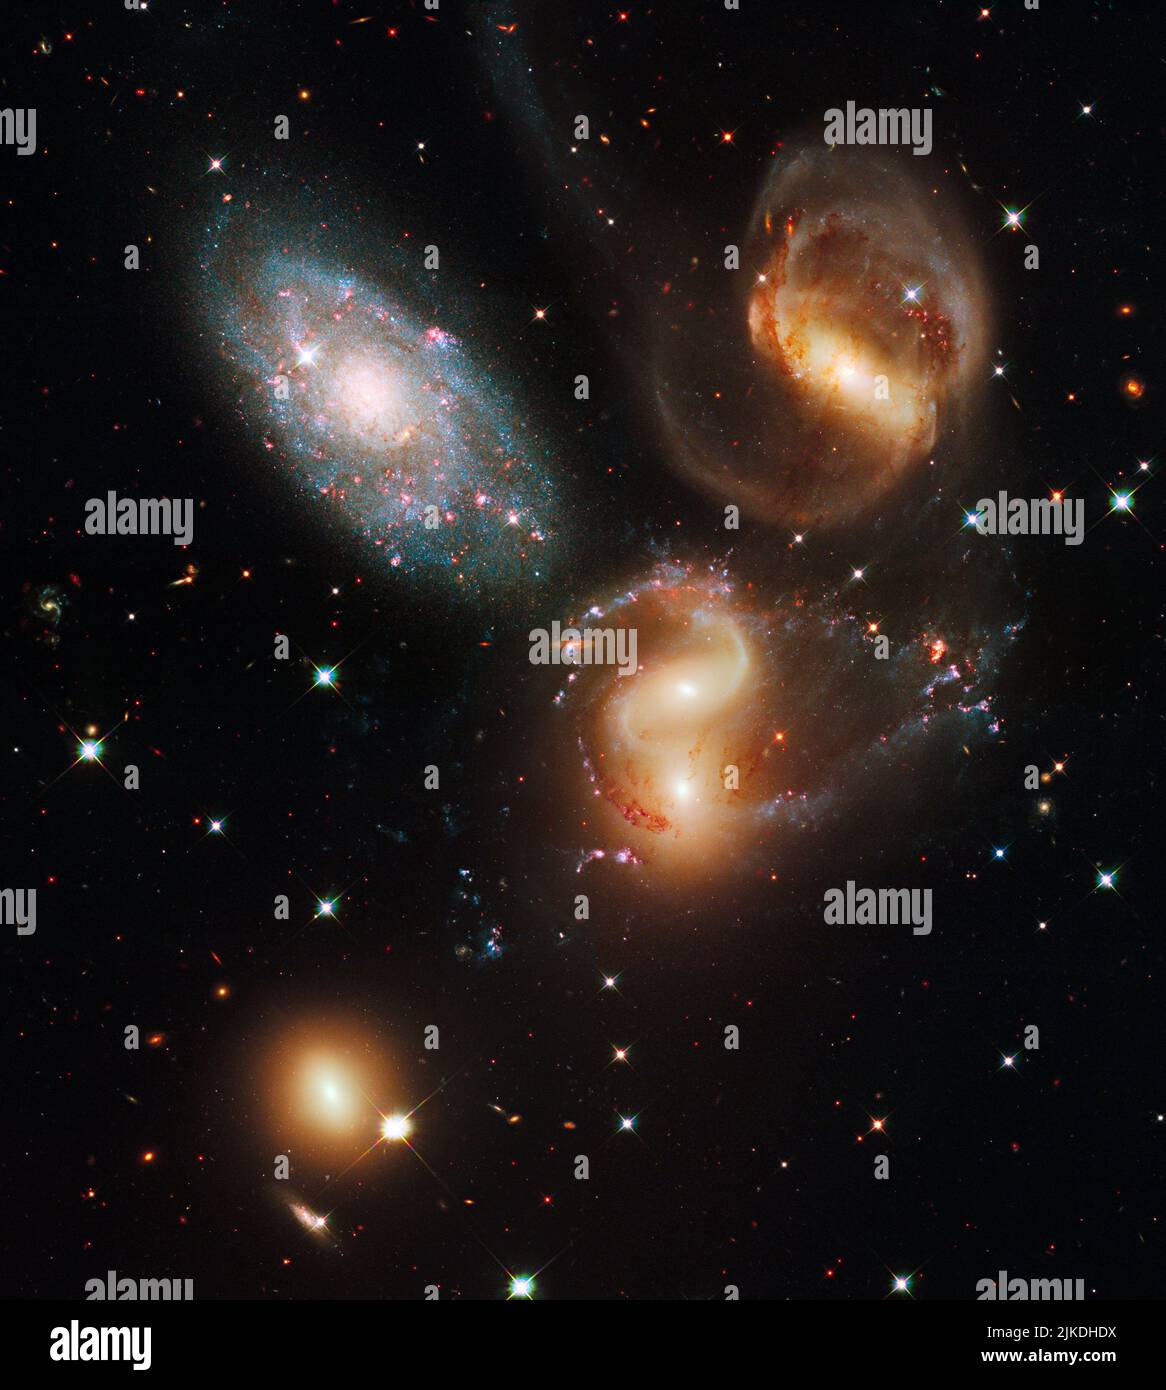 This portrait of Stephan's Quintet, also known as the Hickson Compact Group 92, was taken by the new Wide Field Camera 3 (WFC3) aboard the NASA/ESA Stock Photo